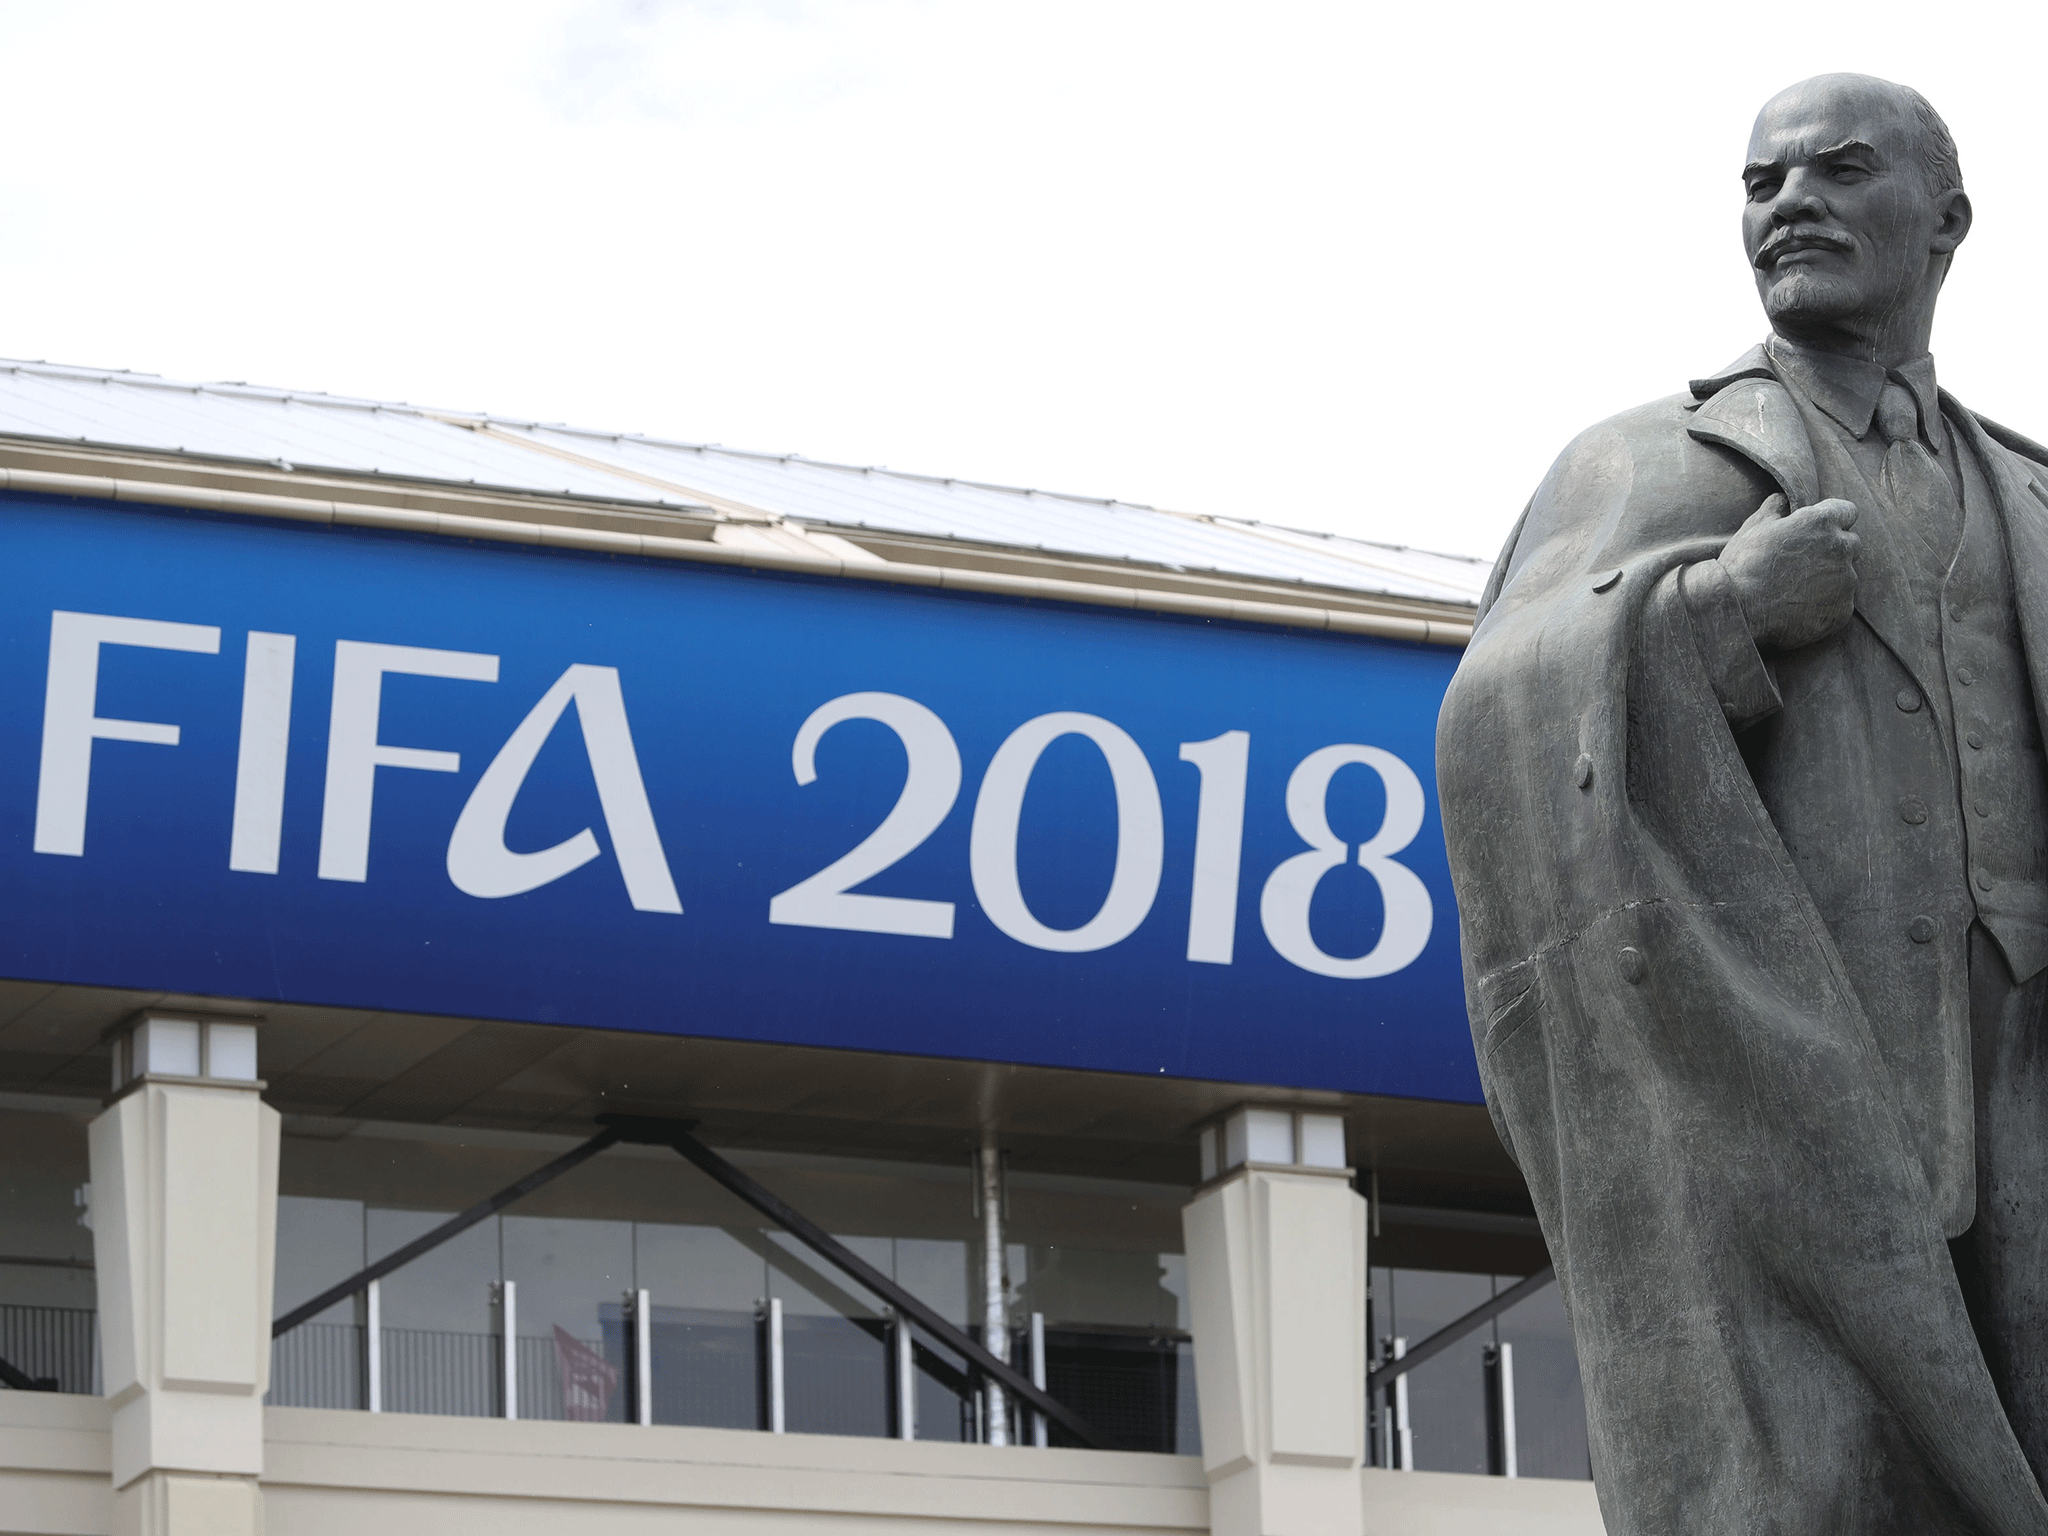 A statue of Lenin outside the Luzhniki Stadium in Moscow, where the opening match of the World Cup will be held